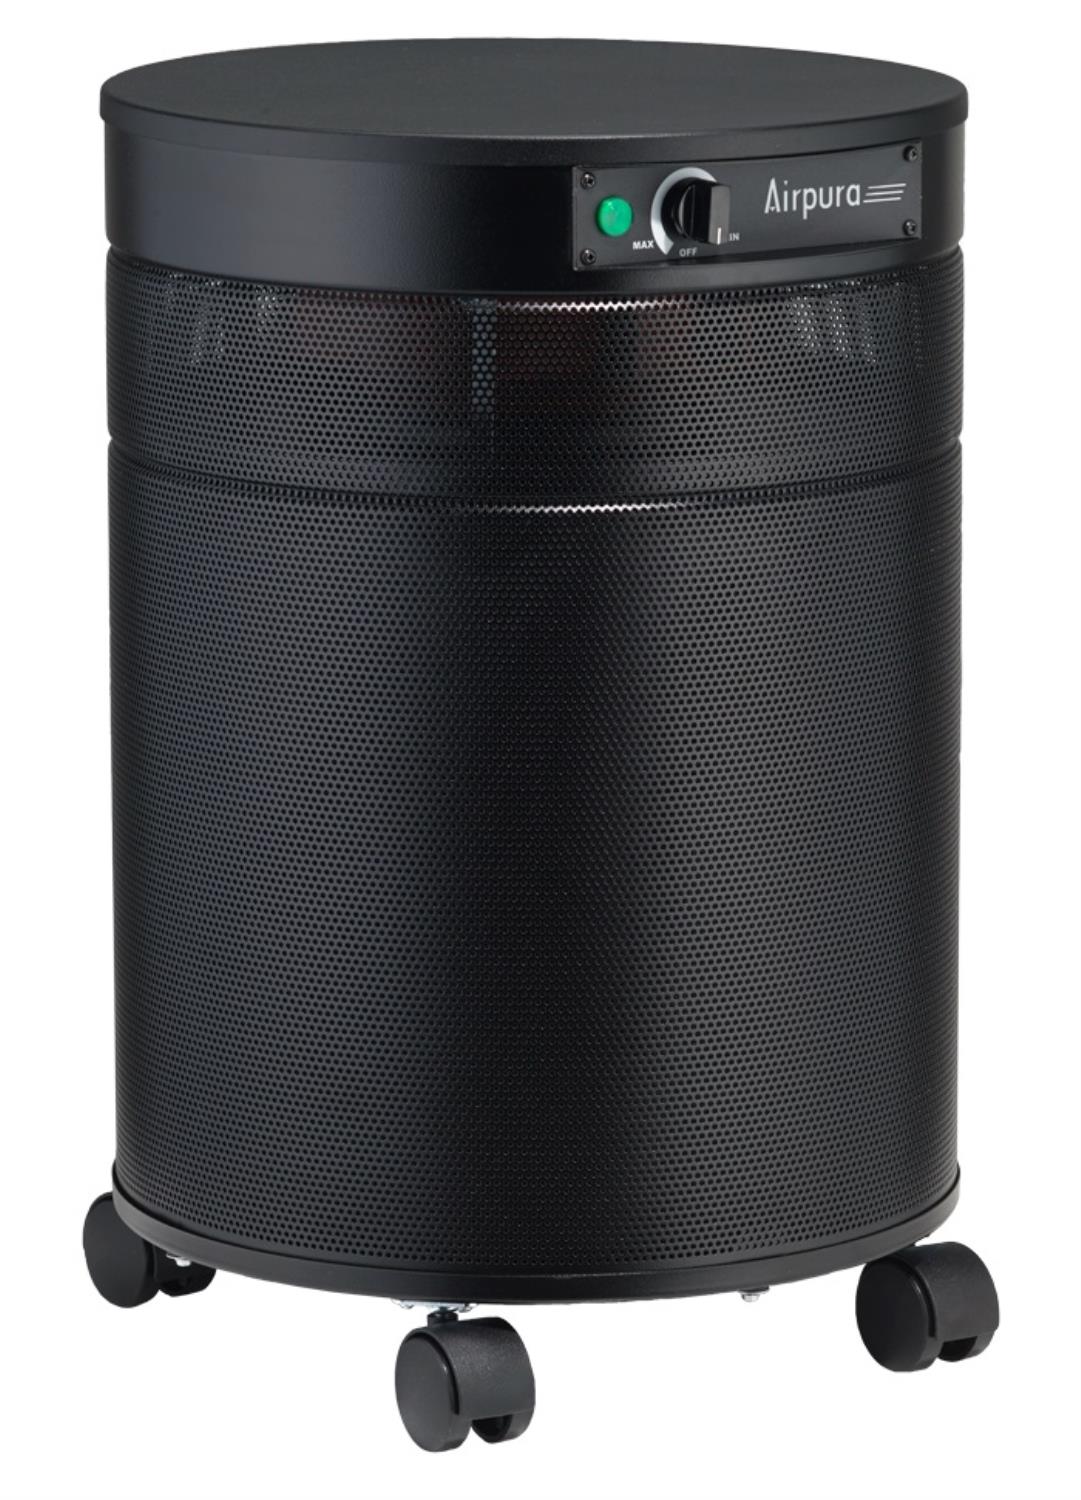 Airpura Powdered Coated Galvanized Metal Air Purifier in Black Finish F614-BLK